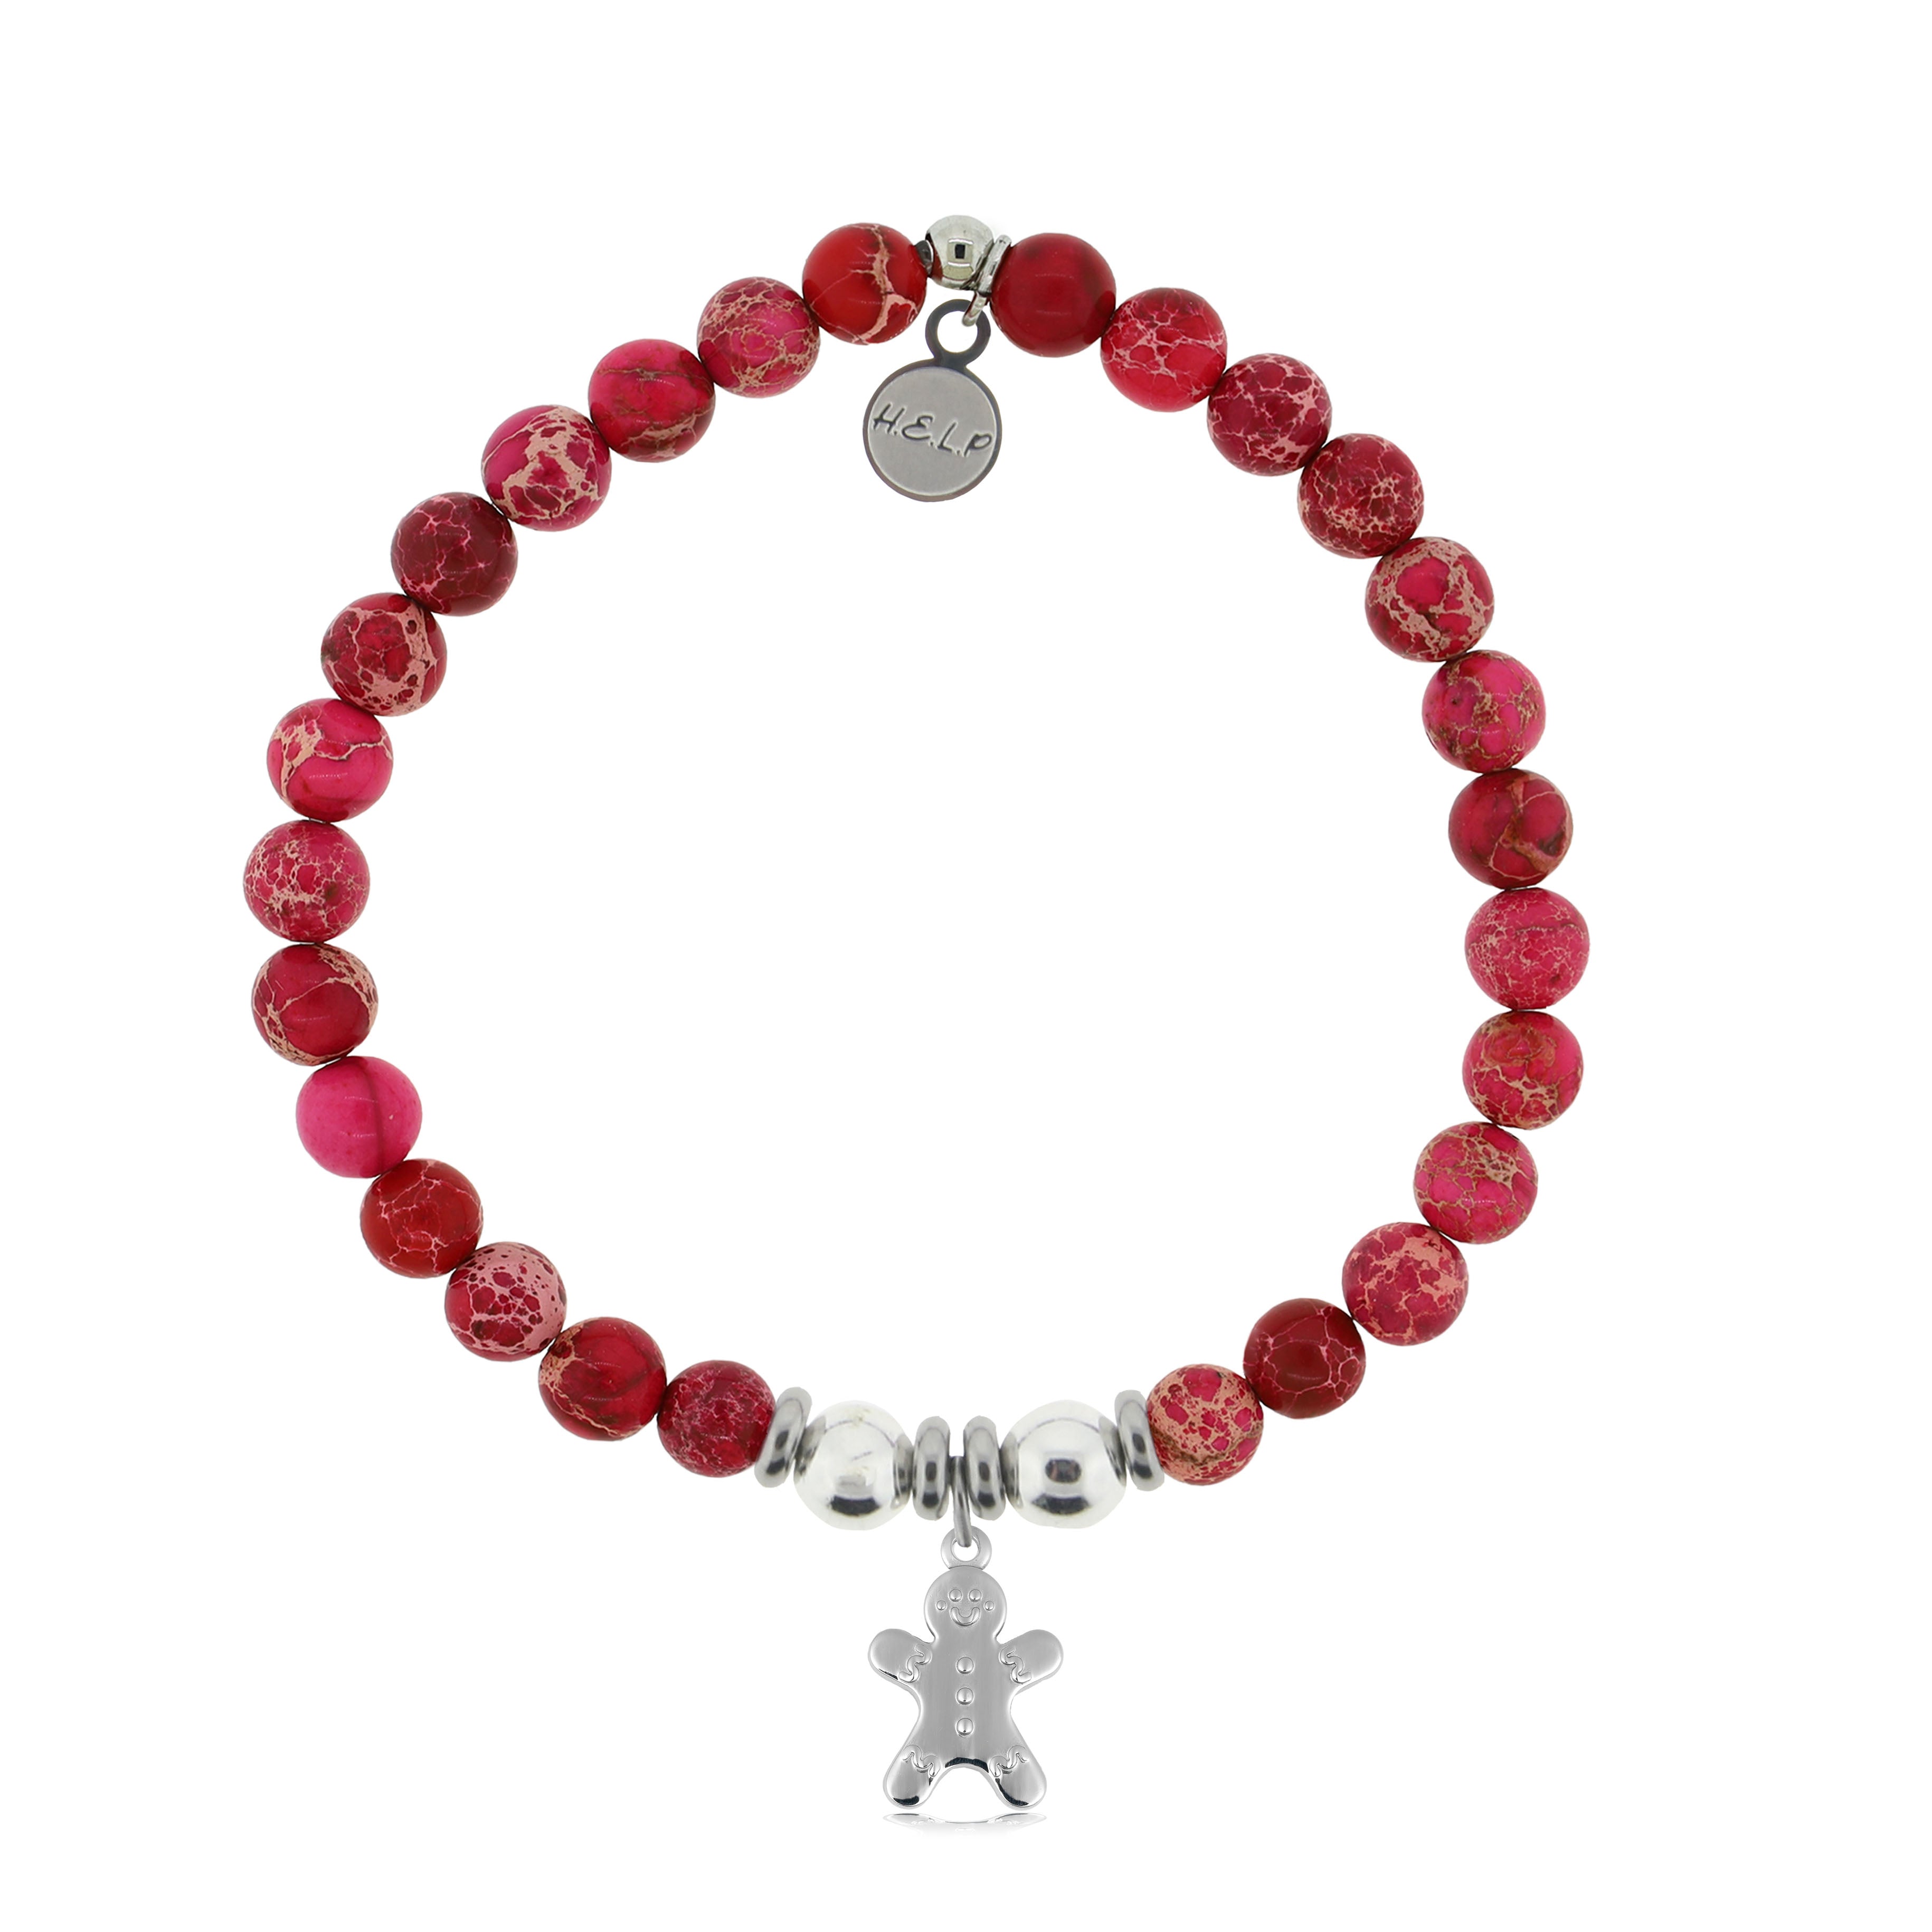 HELP by TJ Gingerbread Man Charm with Cranberry Jasper Charity Bracelet